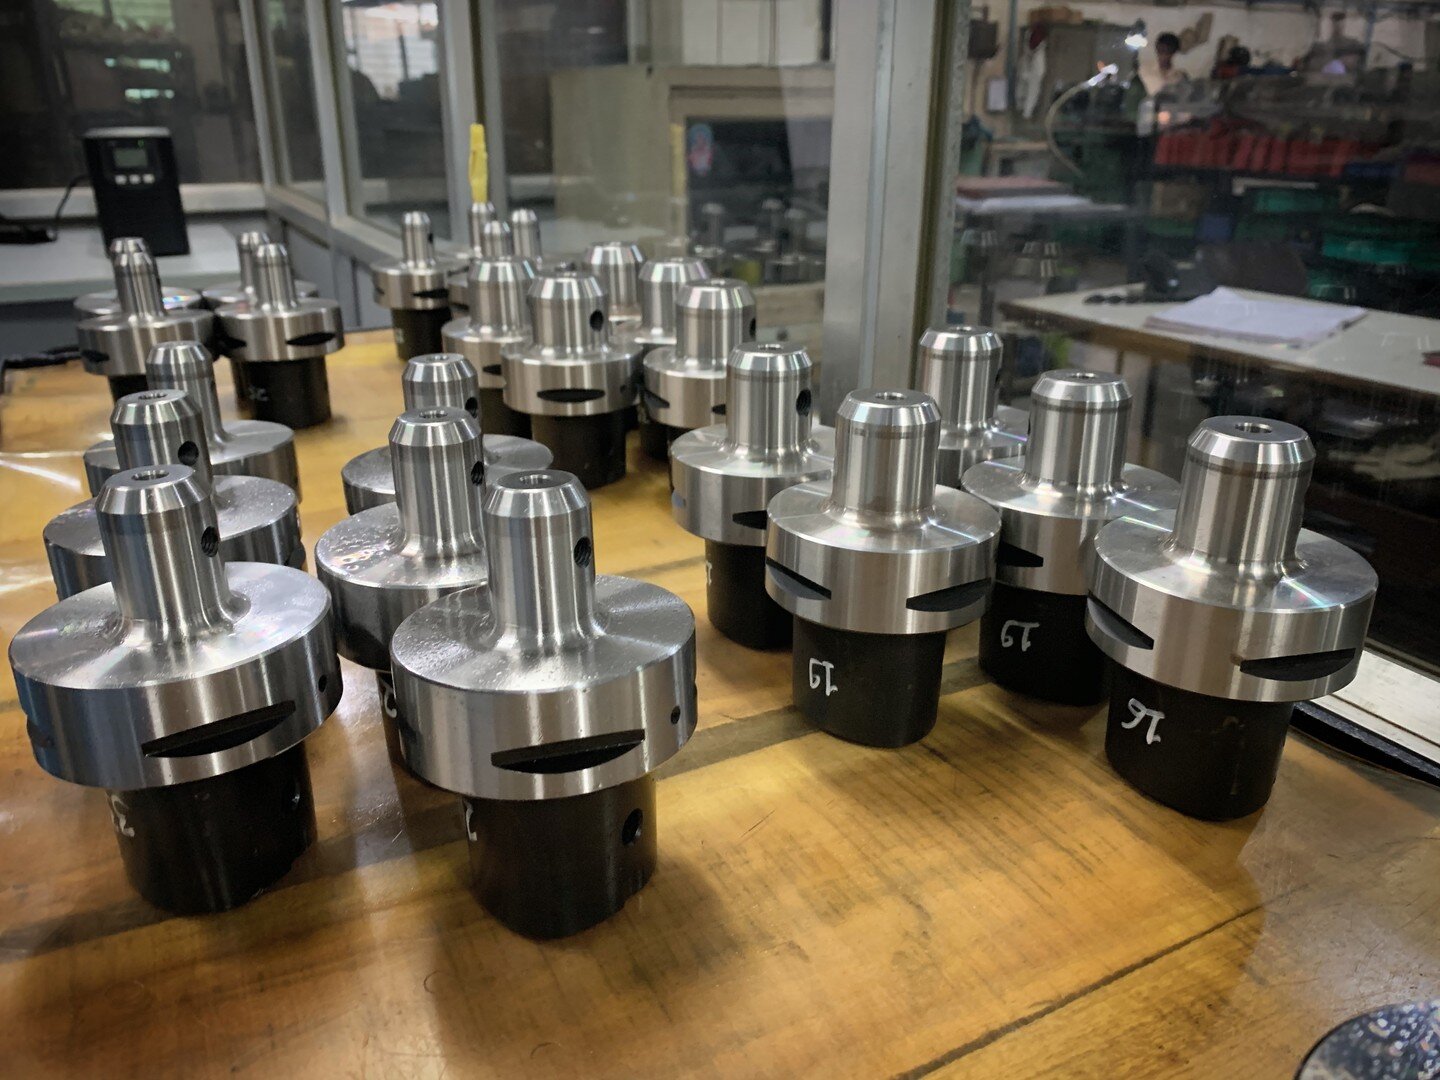 PTI (PSC) Endmill holders getting ready for taper grinding on the Studer! @studer.machines 

#cncmachining #precisionmachining #precisiongrinding #shiny